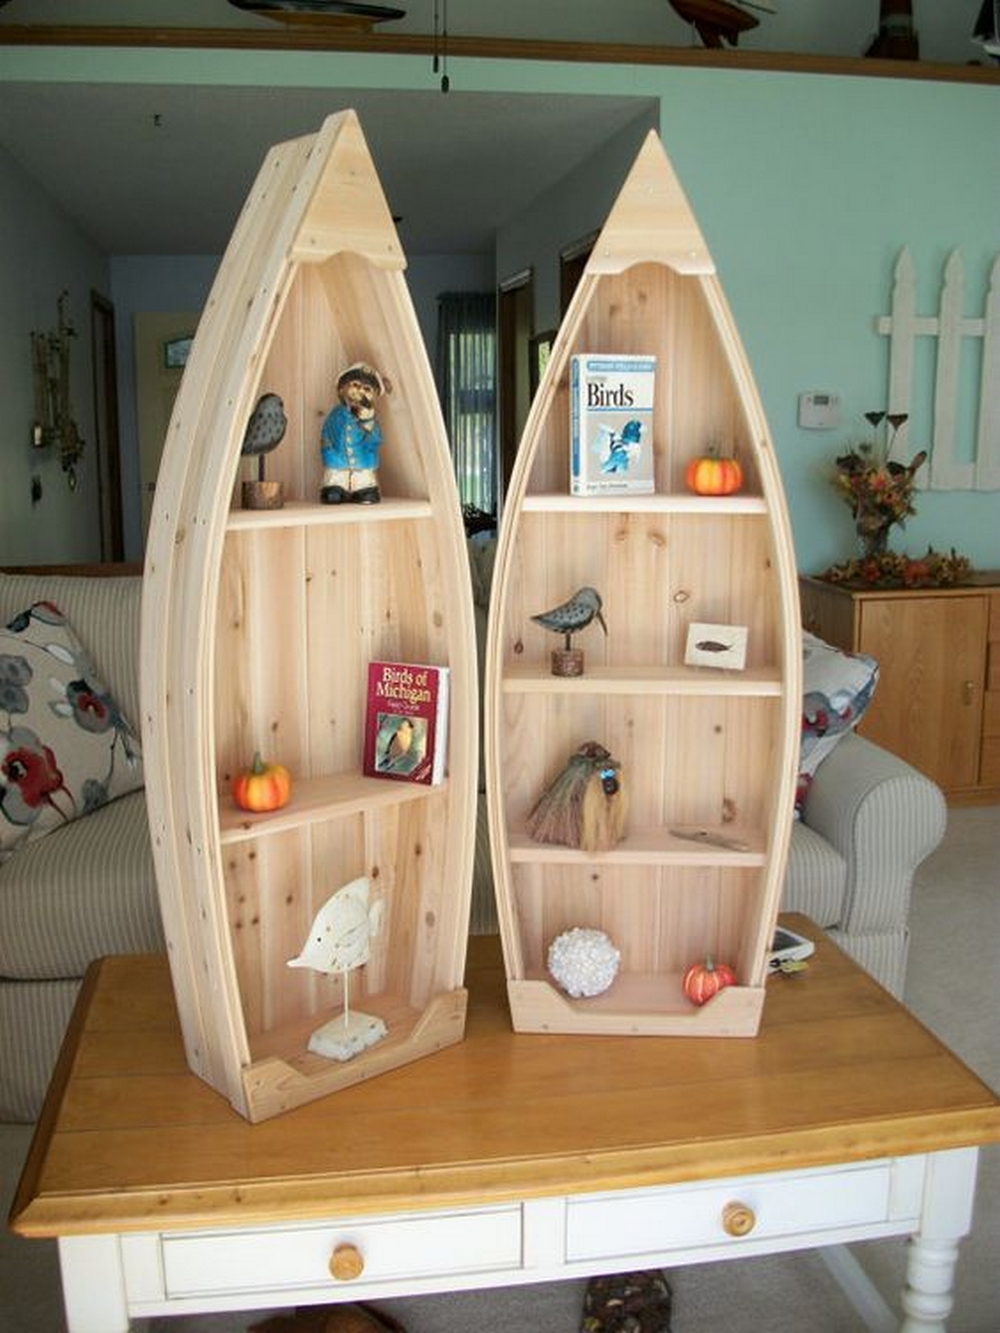 How to Build a Boat Bookshelf | Your Projects@OBN